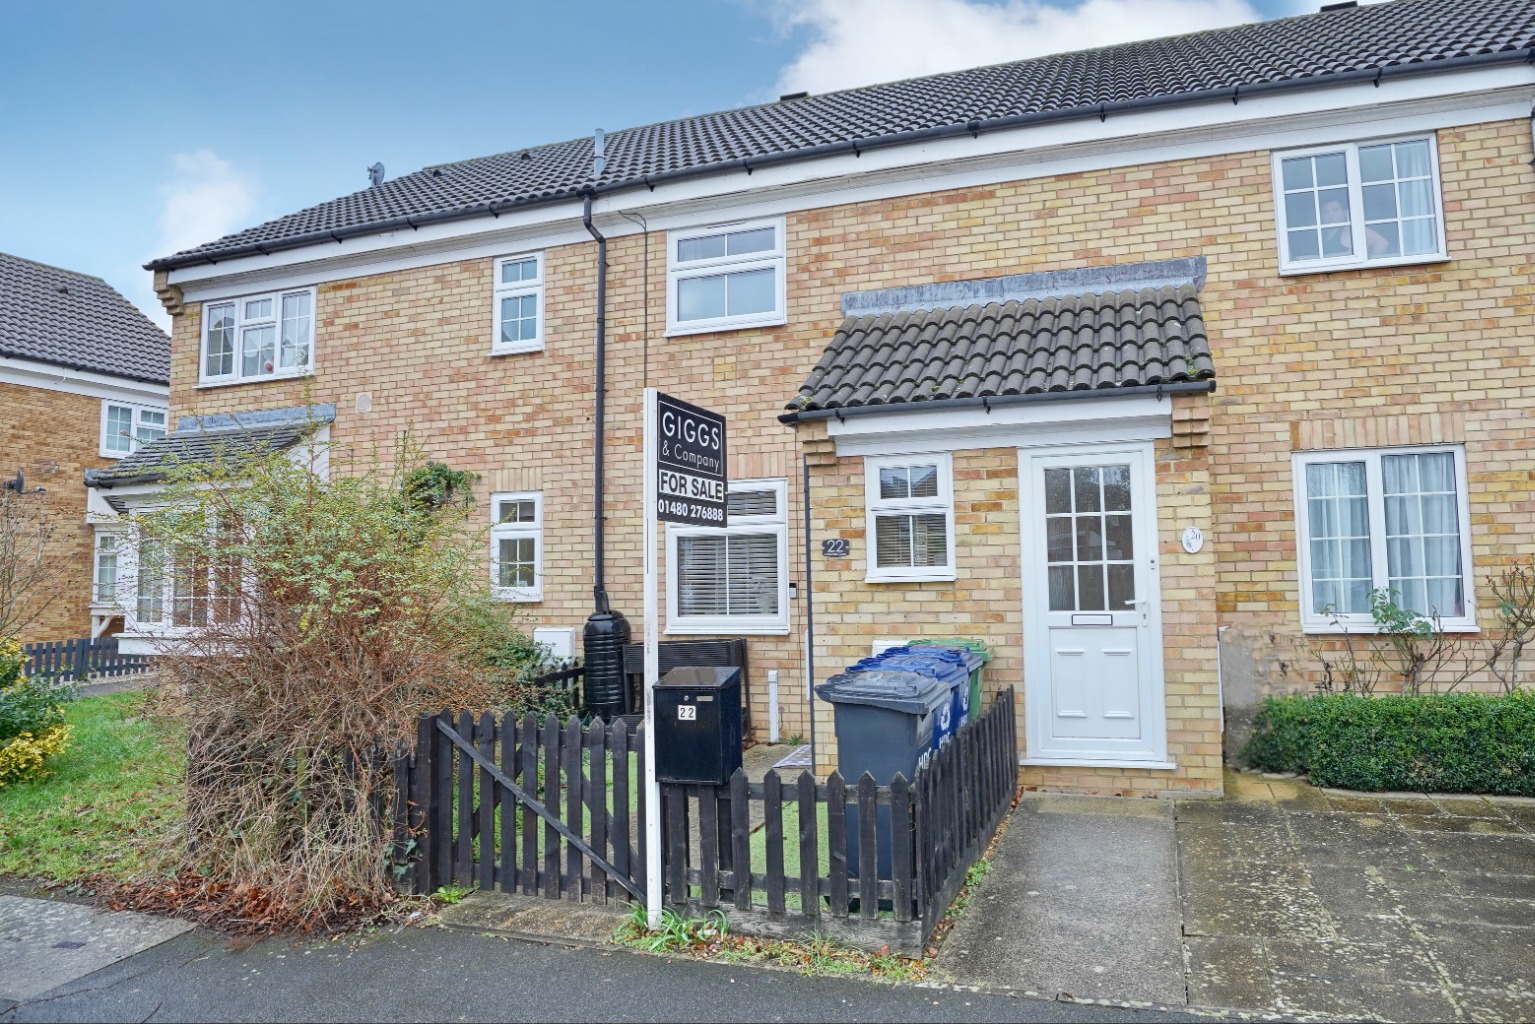 **GUIDE PRICE £230,000 - £250,000** We're delighted to be offering for sale this nicely presented home, set in a popular area of Eaton Socon.   Chawston close is situated within walking distance to an array of amenities including pubs, shops, schools, park walks and more